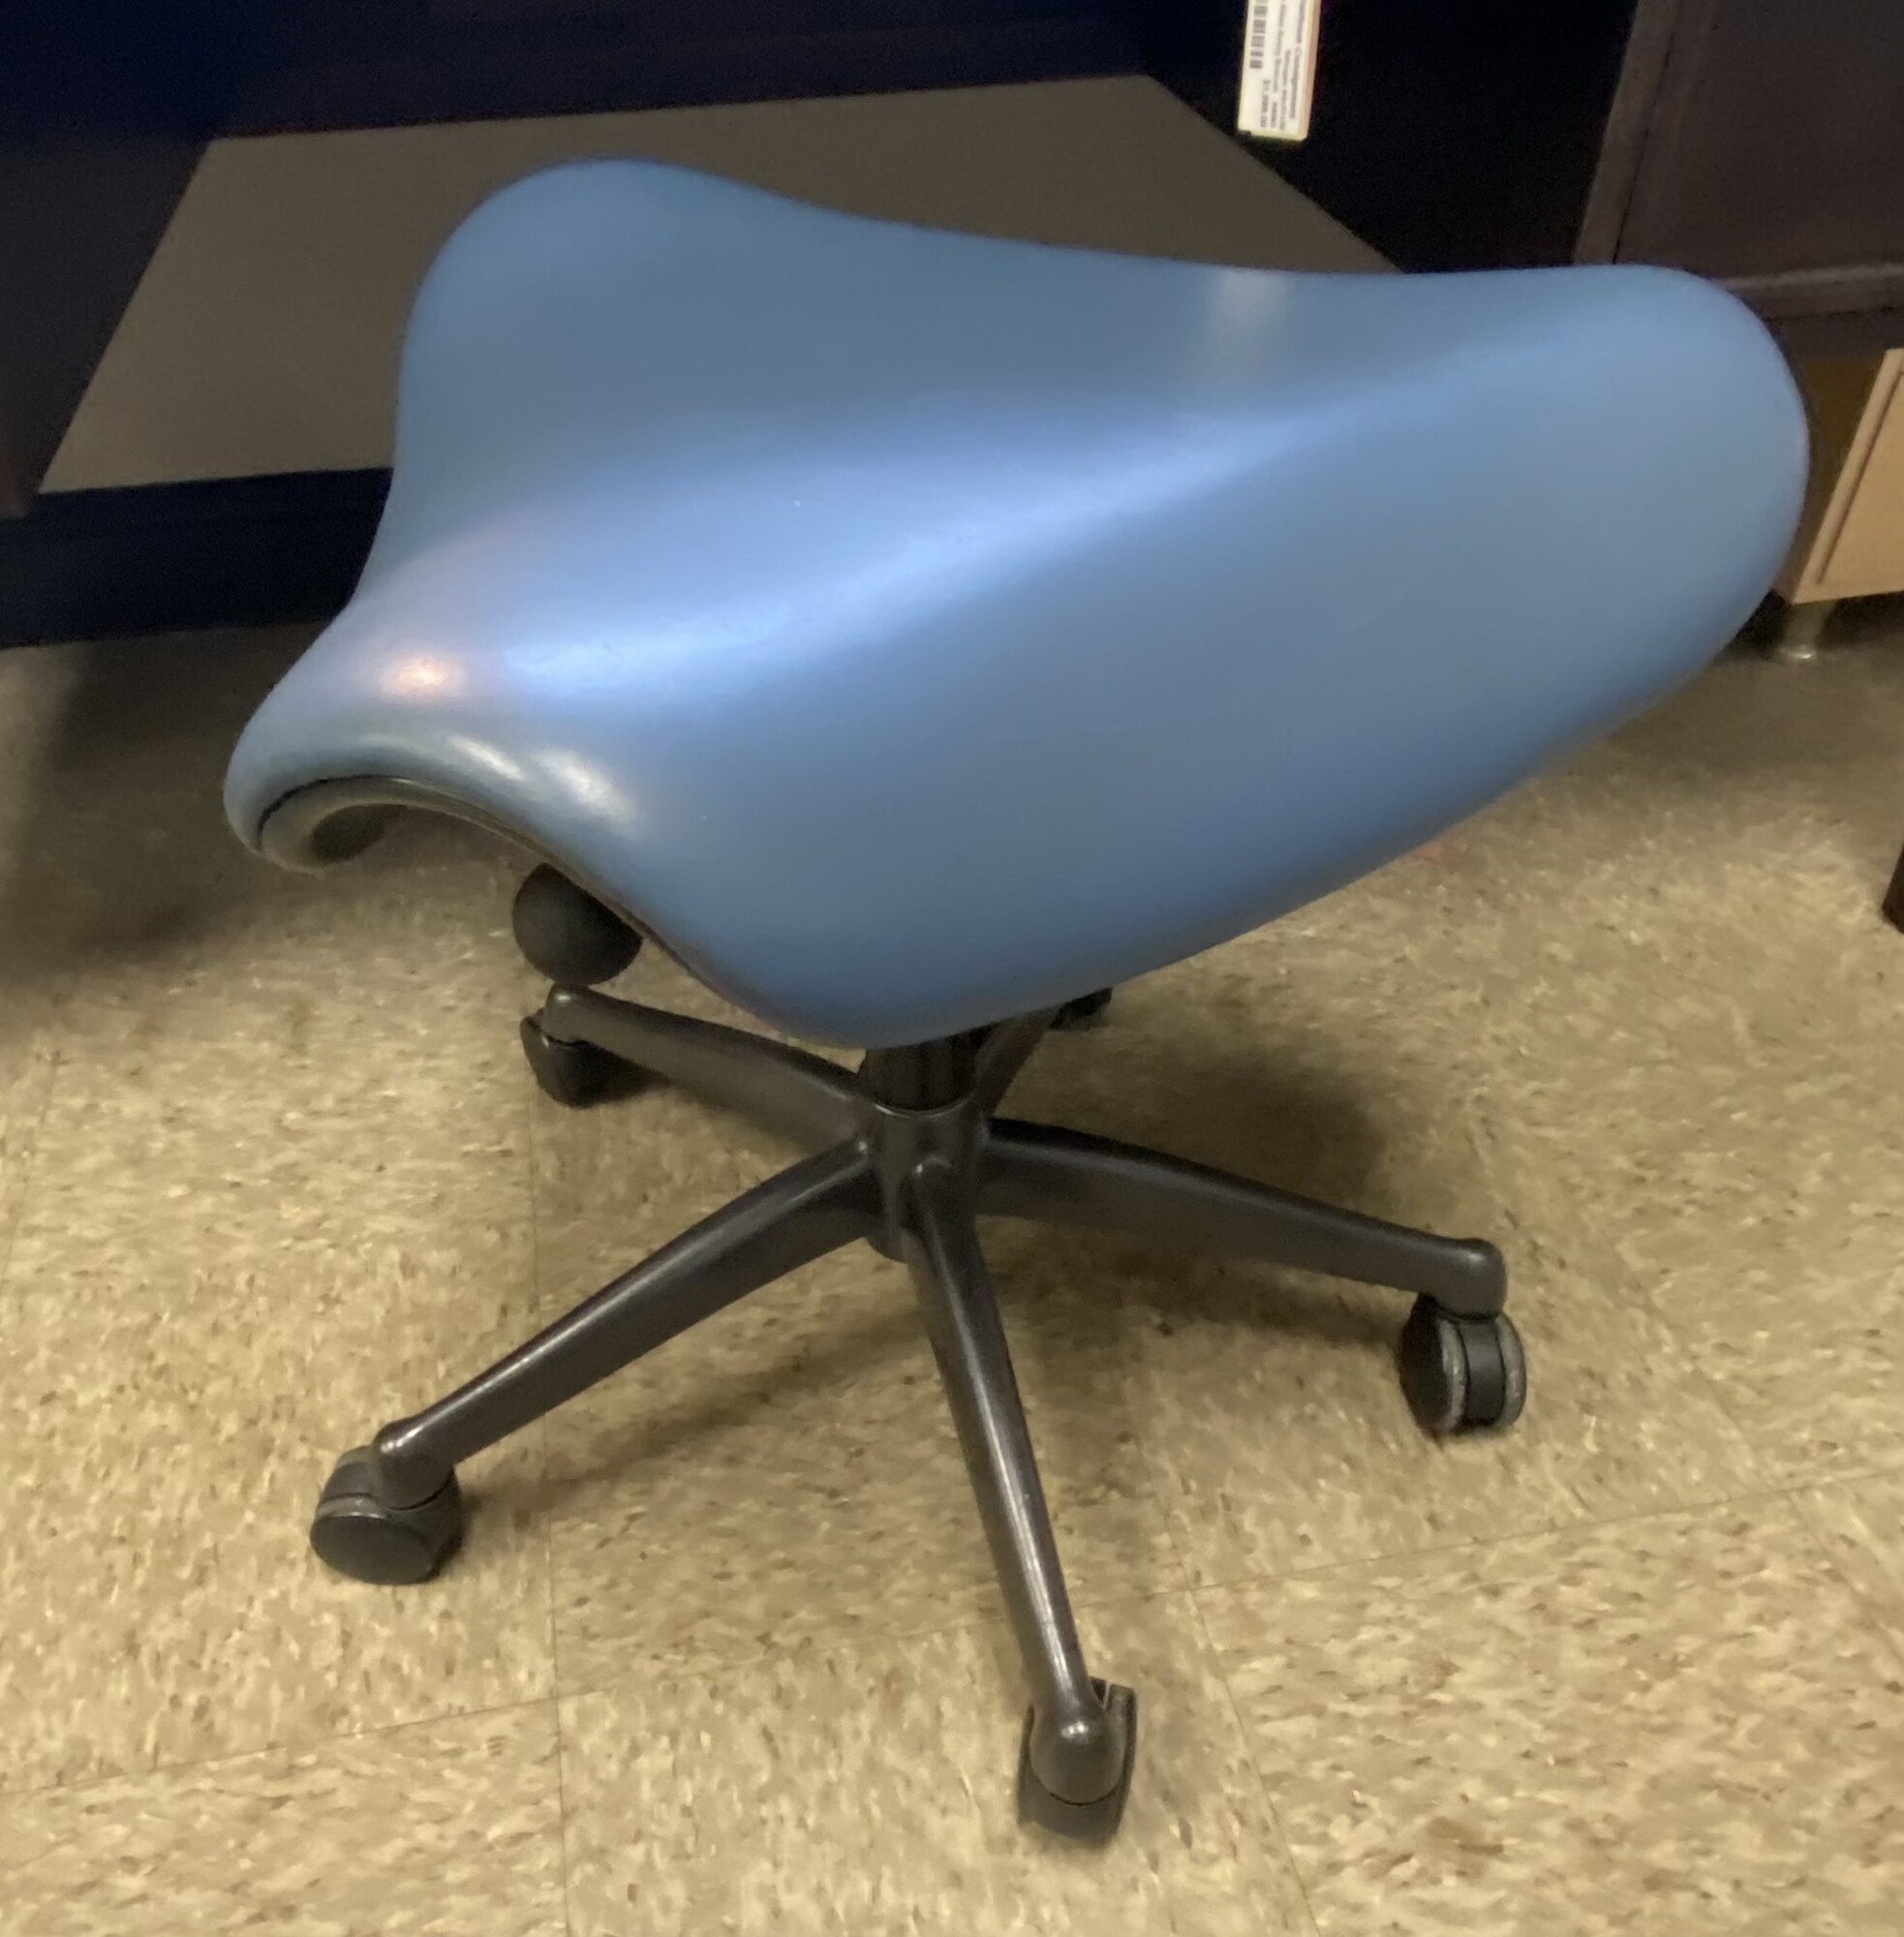 Humanscale Freedom Saddle Desk Stool, Blue, Size: 21x24 Inch
Part of Humanscale’s award-winning Freedom seating line, the Freedom Saddle seat drafting stool is the most comfortable, versatile, and ergonomic stool ever made. This rolling saddle stool edition makes sitting comfortable and workplace movement simple while complementing any workspace or residential office. The triangular cushion of the F300 saddle seat drafting stool encourages users to sit in a saddle or riding posture. Sitting in this position lowers the thighs, opens up the hips and allows for improved circulation. The posture also reduces pressure points on the tail bone enabling longer term sitting comfort.